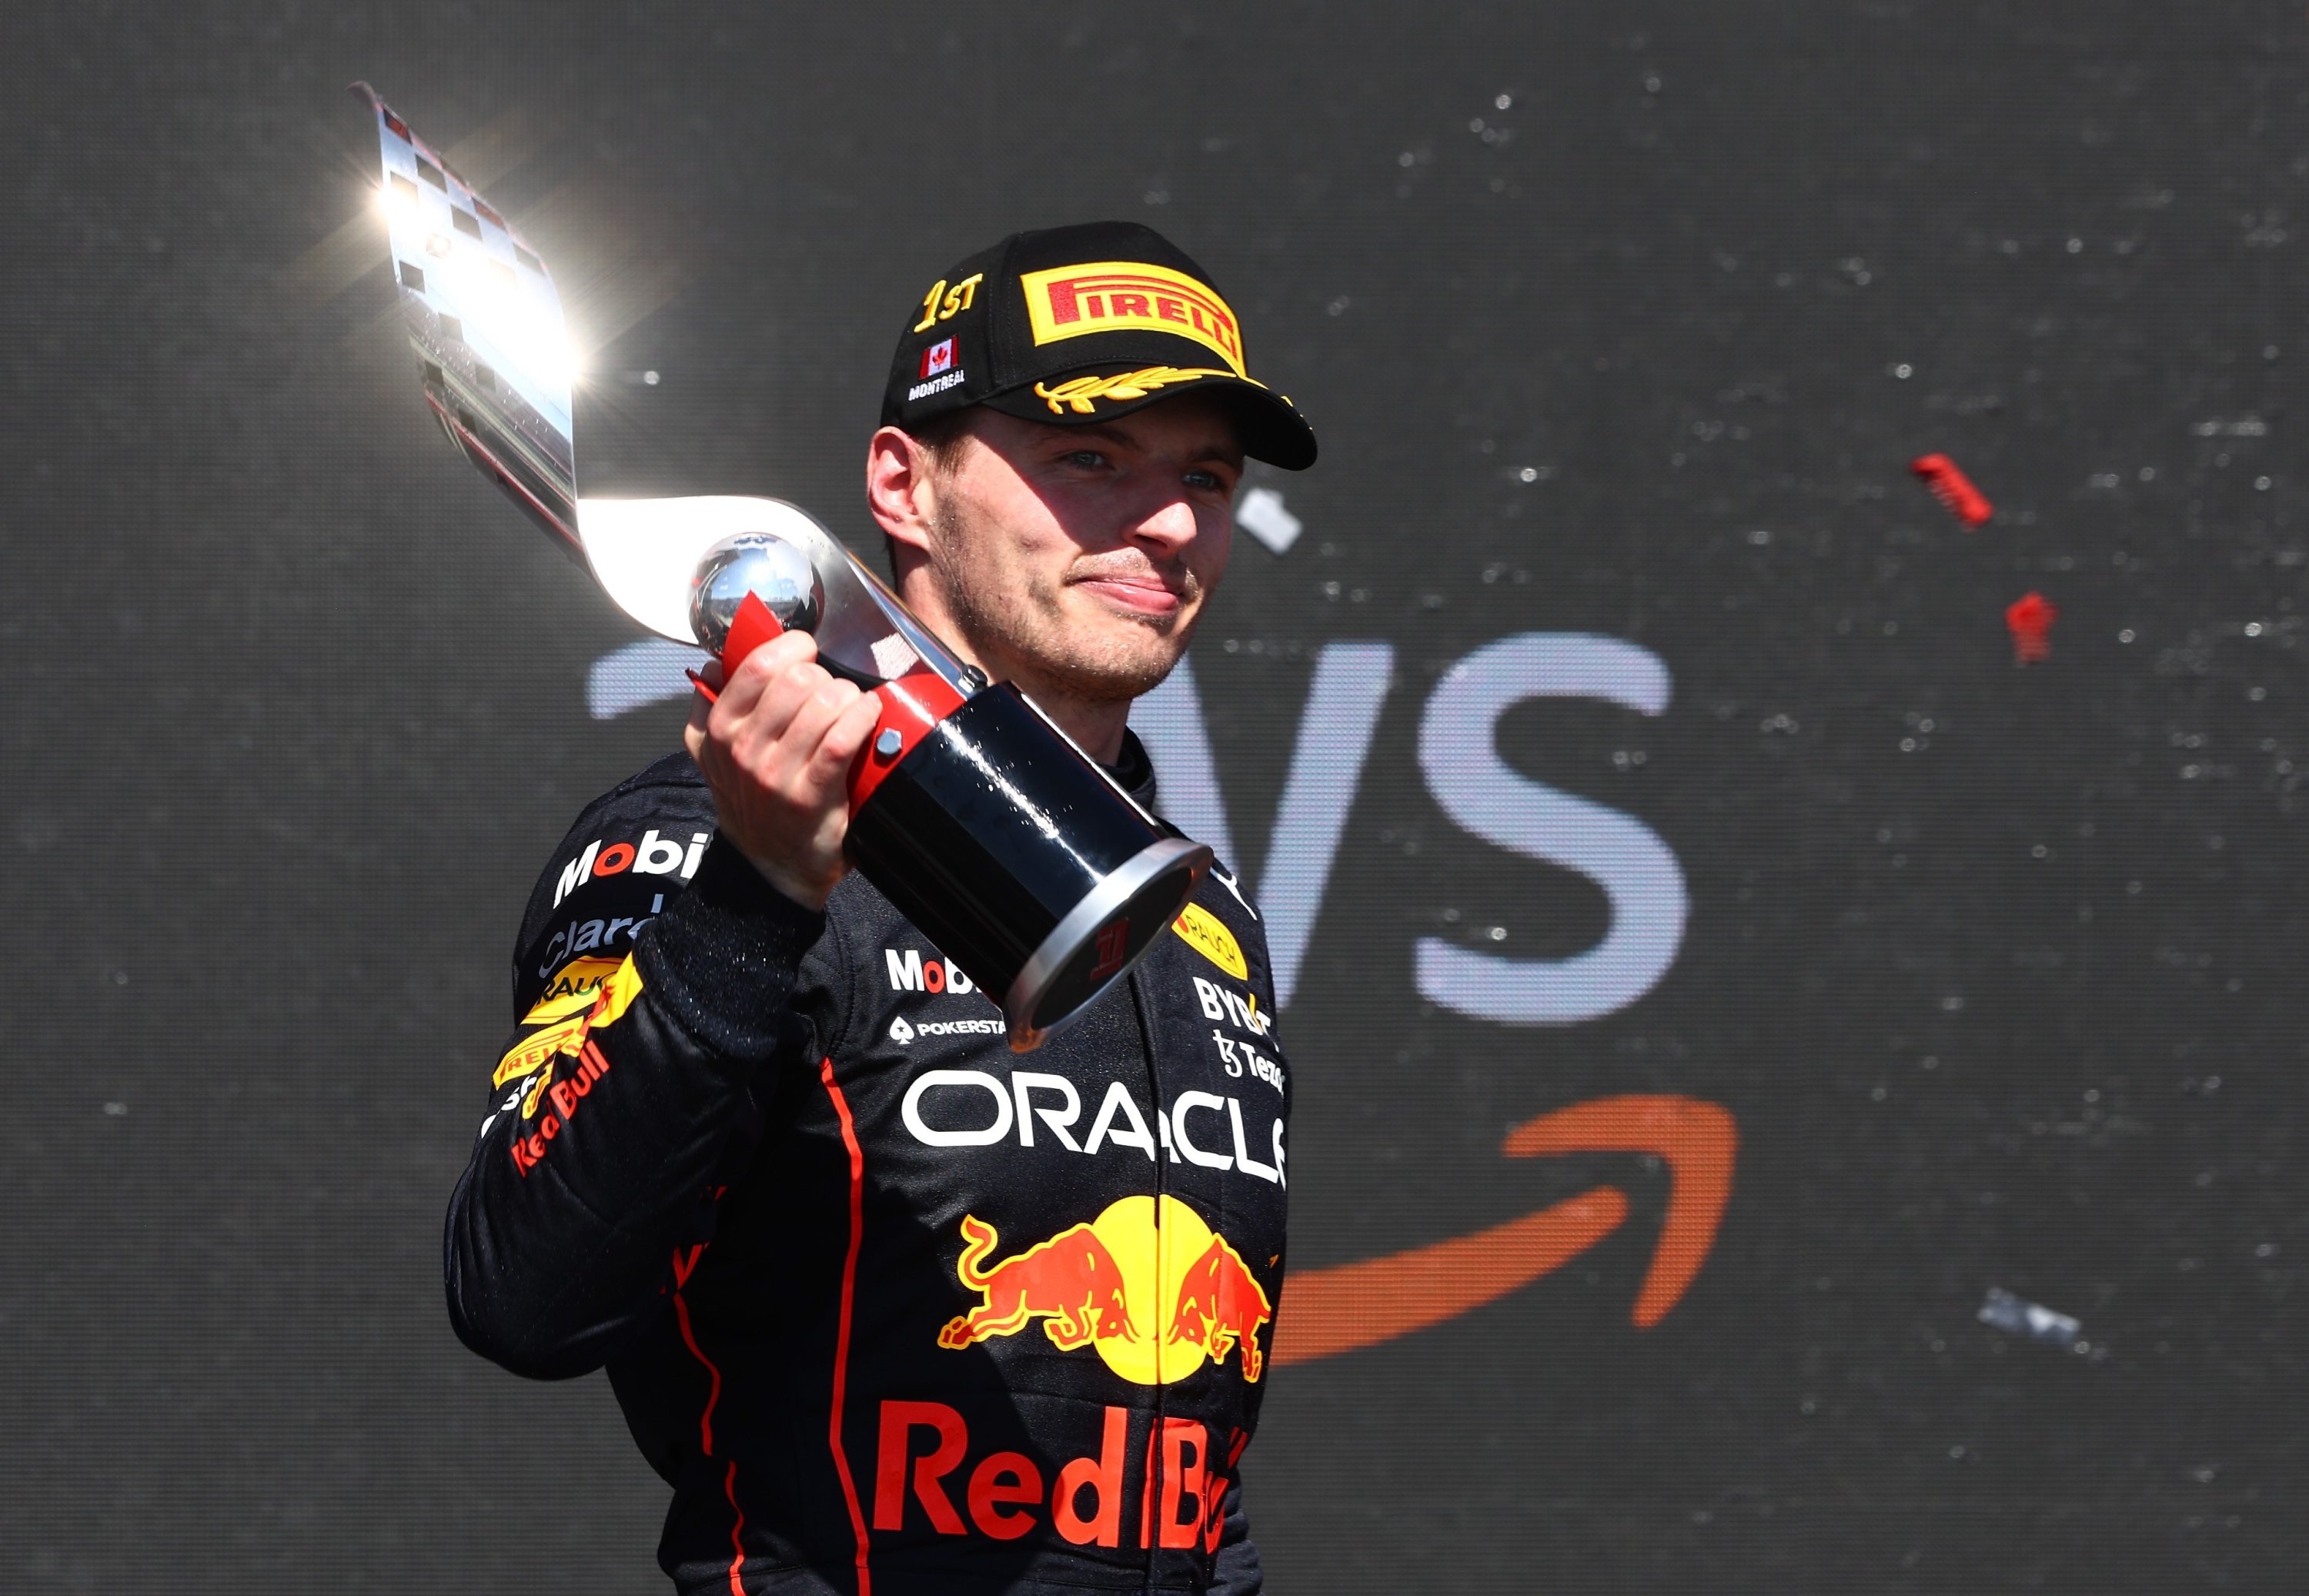 F1 Canadian GP: Red Bull's Max Verstappen wins his first Canadian GP as Sergio Perez registered DNF, Lewis Hamilton took home his second podium finish